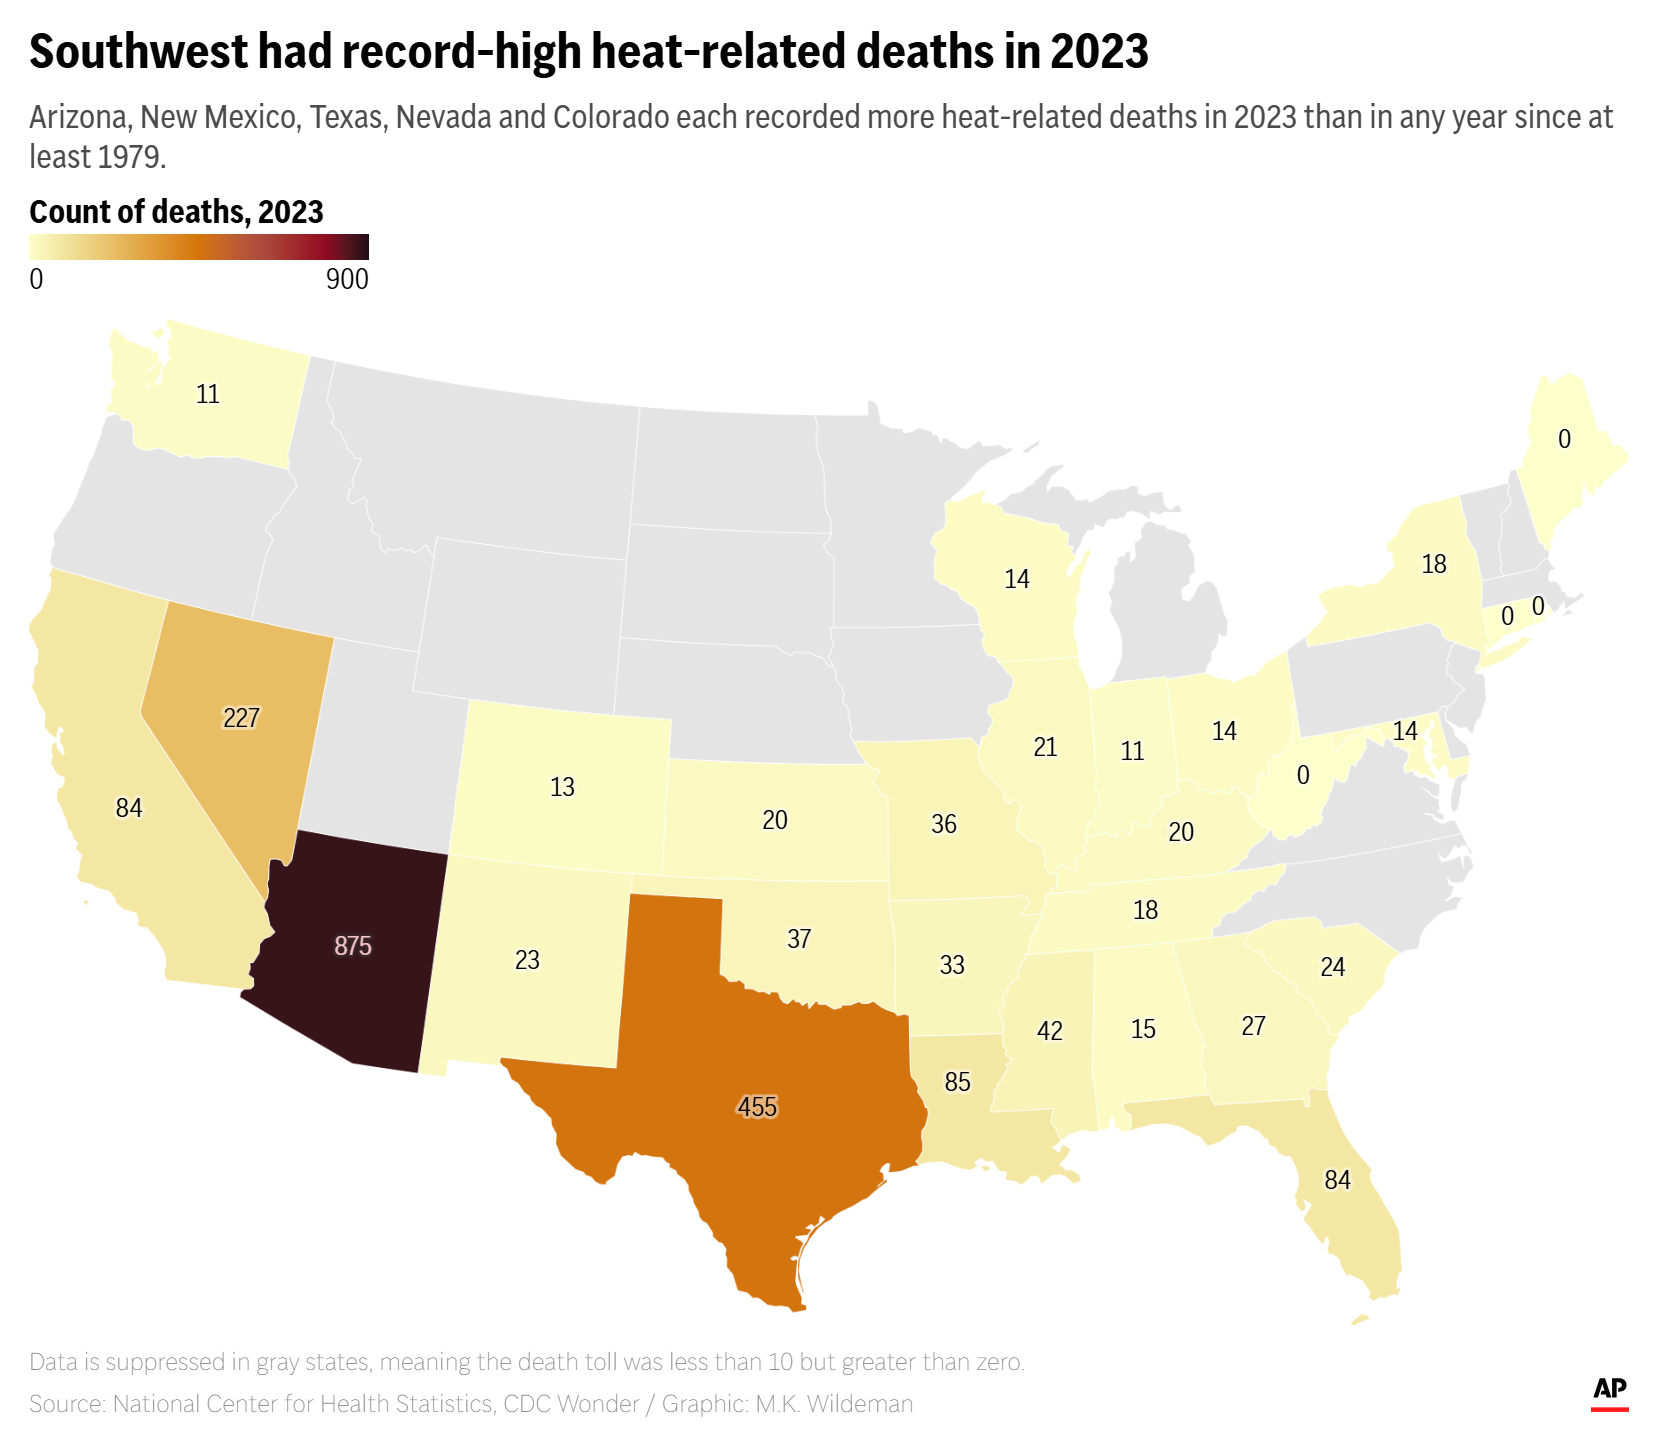 Map showing heat-related deaths in the U.S. in 2023. The Southwest had record-high heat-related deaths in 2023, with Arizona, New Mexico, Texas, Nevada, and Colorado recording more heat-related deaths than in any year since at least 1979. Data: National Center for Health Statistics, CDC Wonder. Graphic: M.K. Wildeman / AP